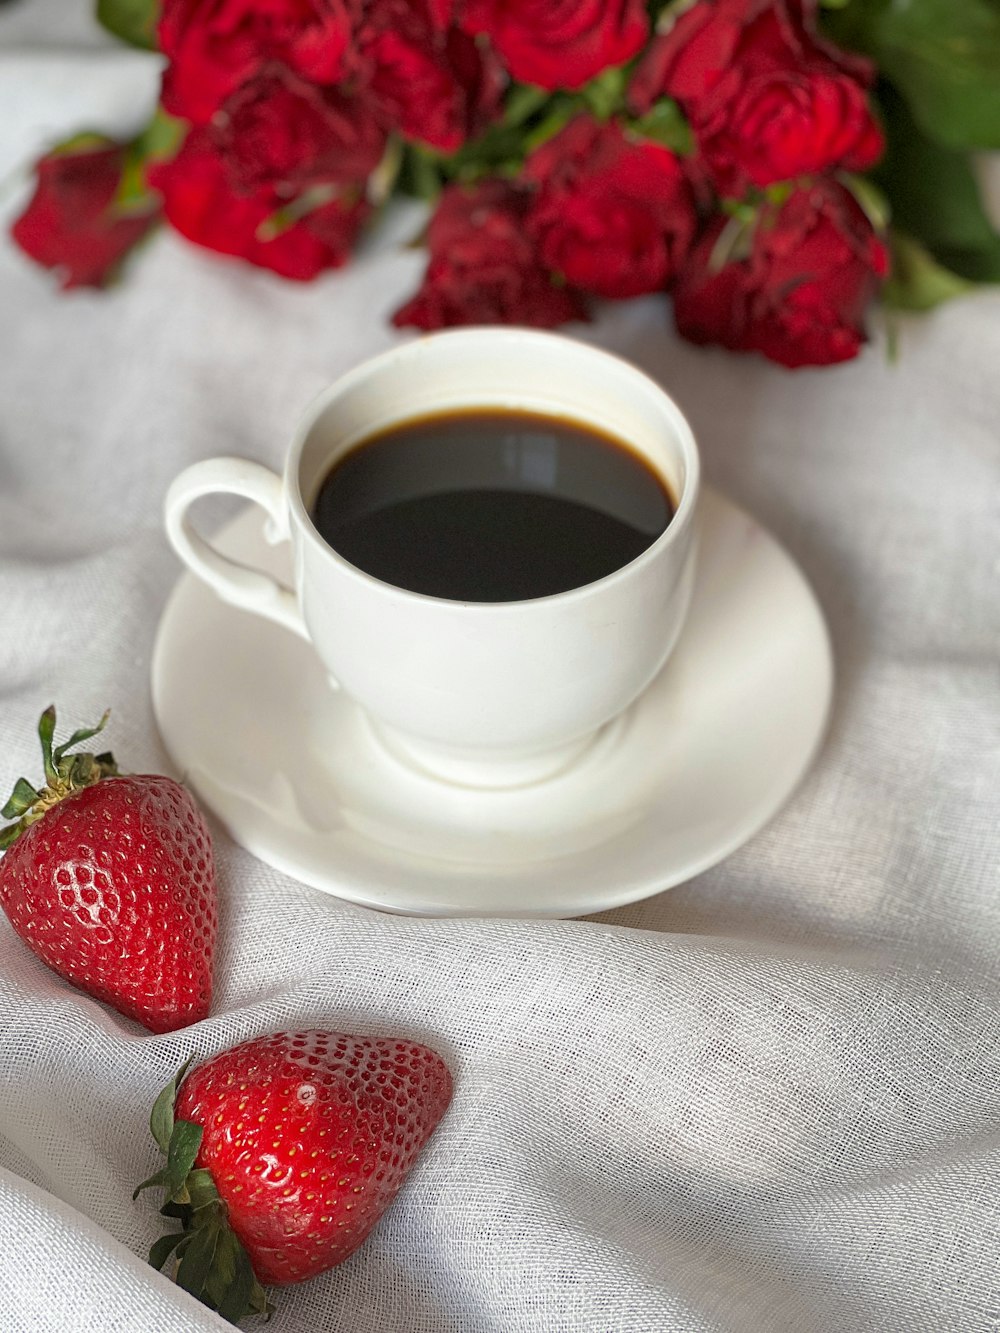 a cup of coffee and two strawberries on a white cloth